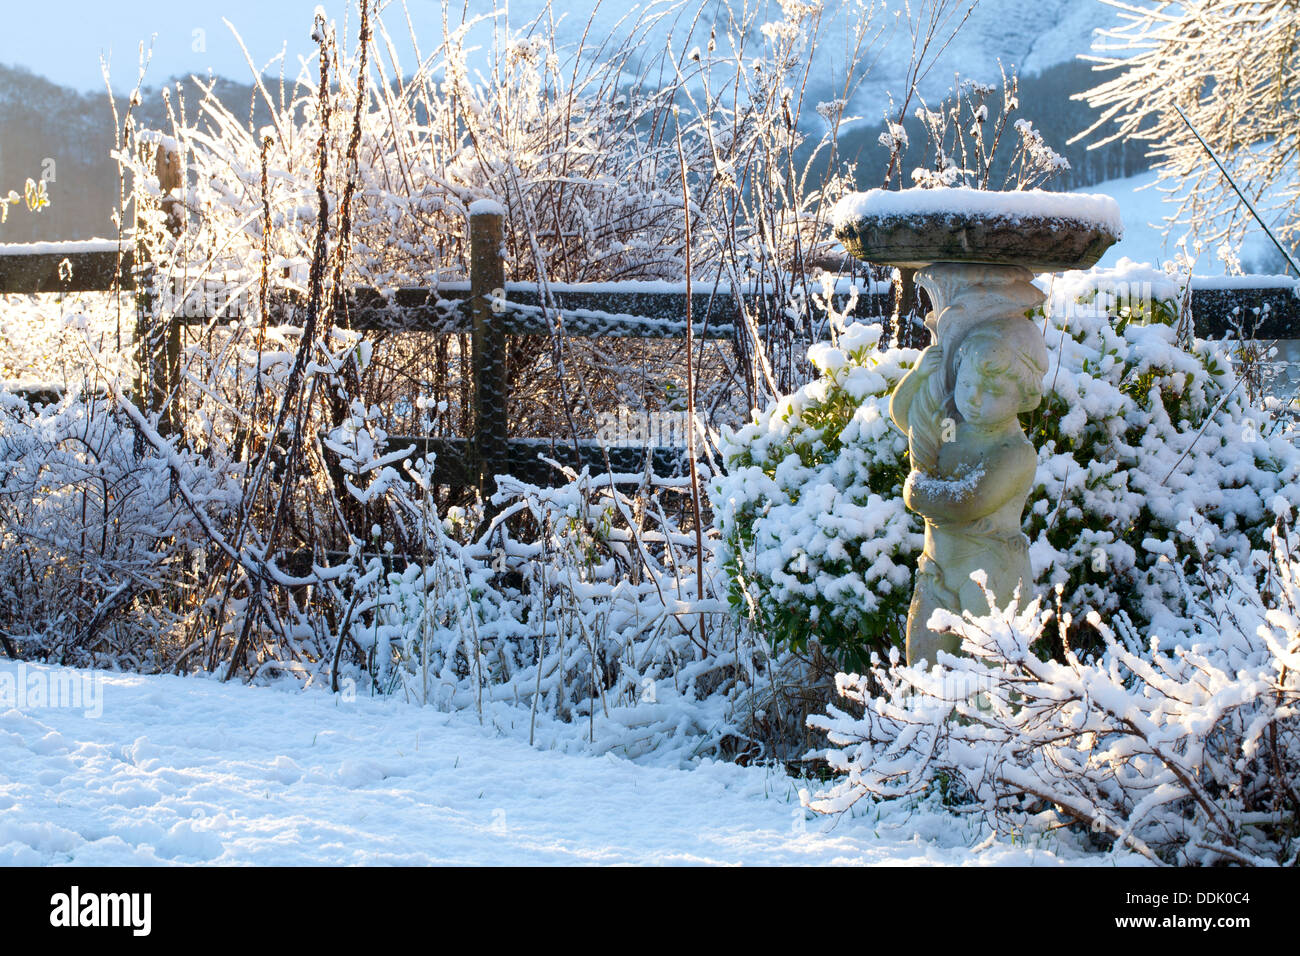 Garden in winter with a birdbath sculpture after a fall of snow. Powys, Wales. January. Stock Photo